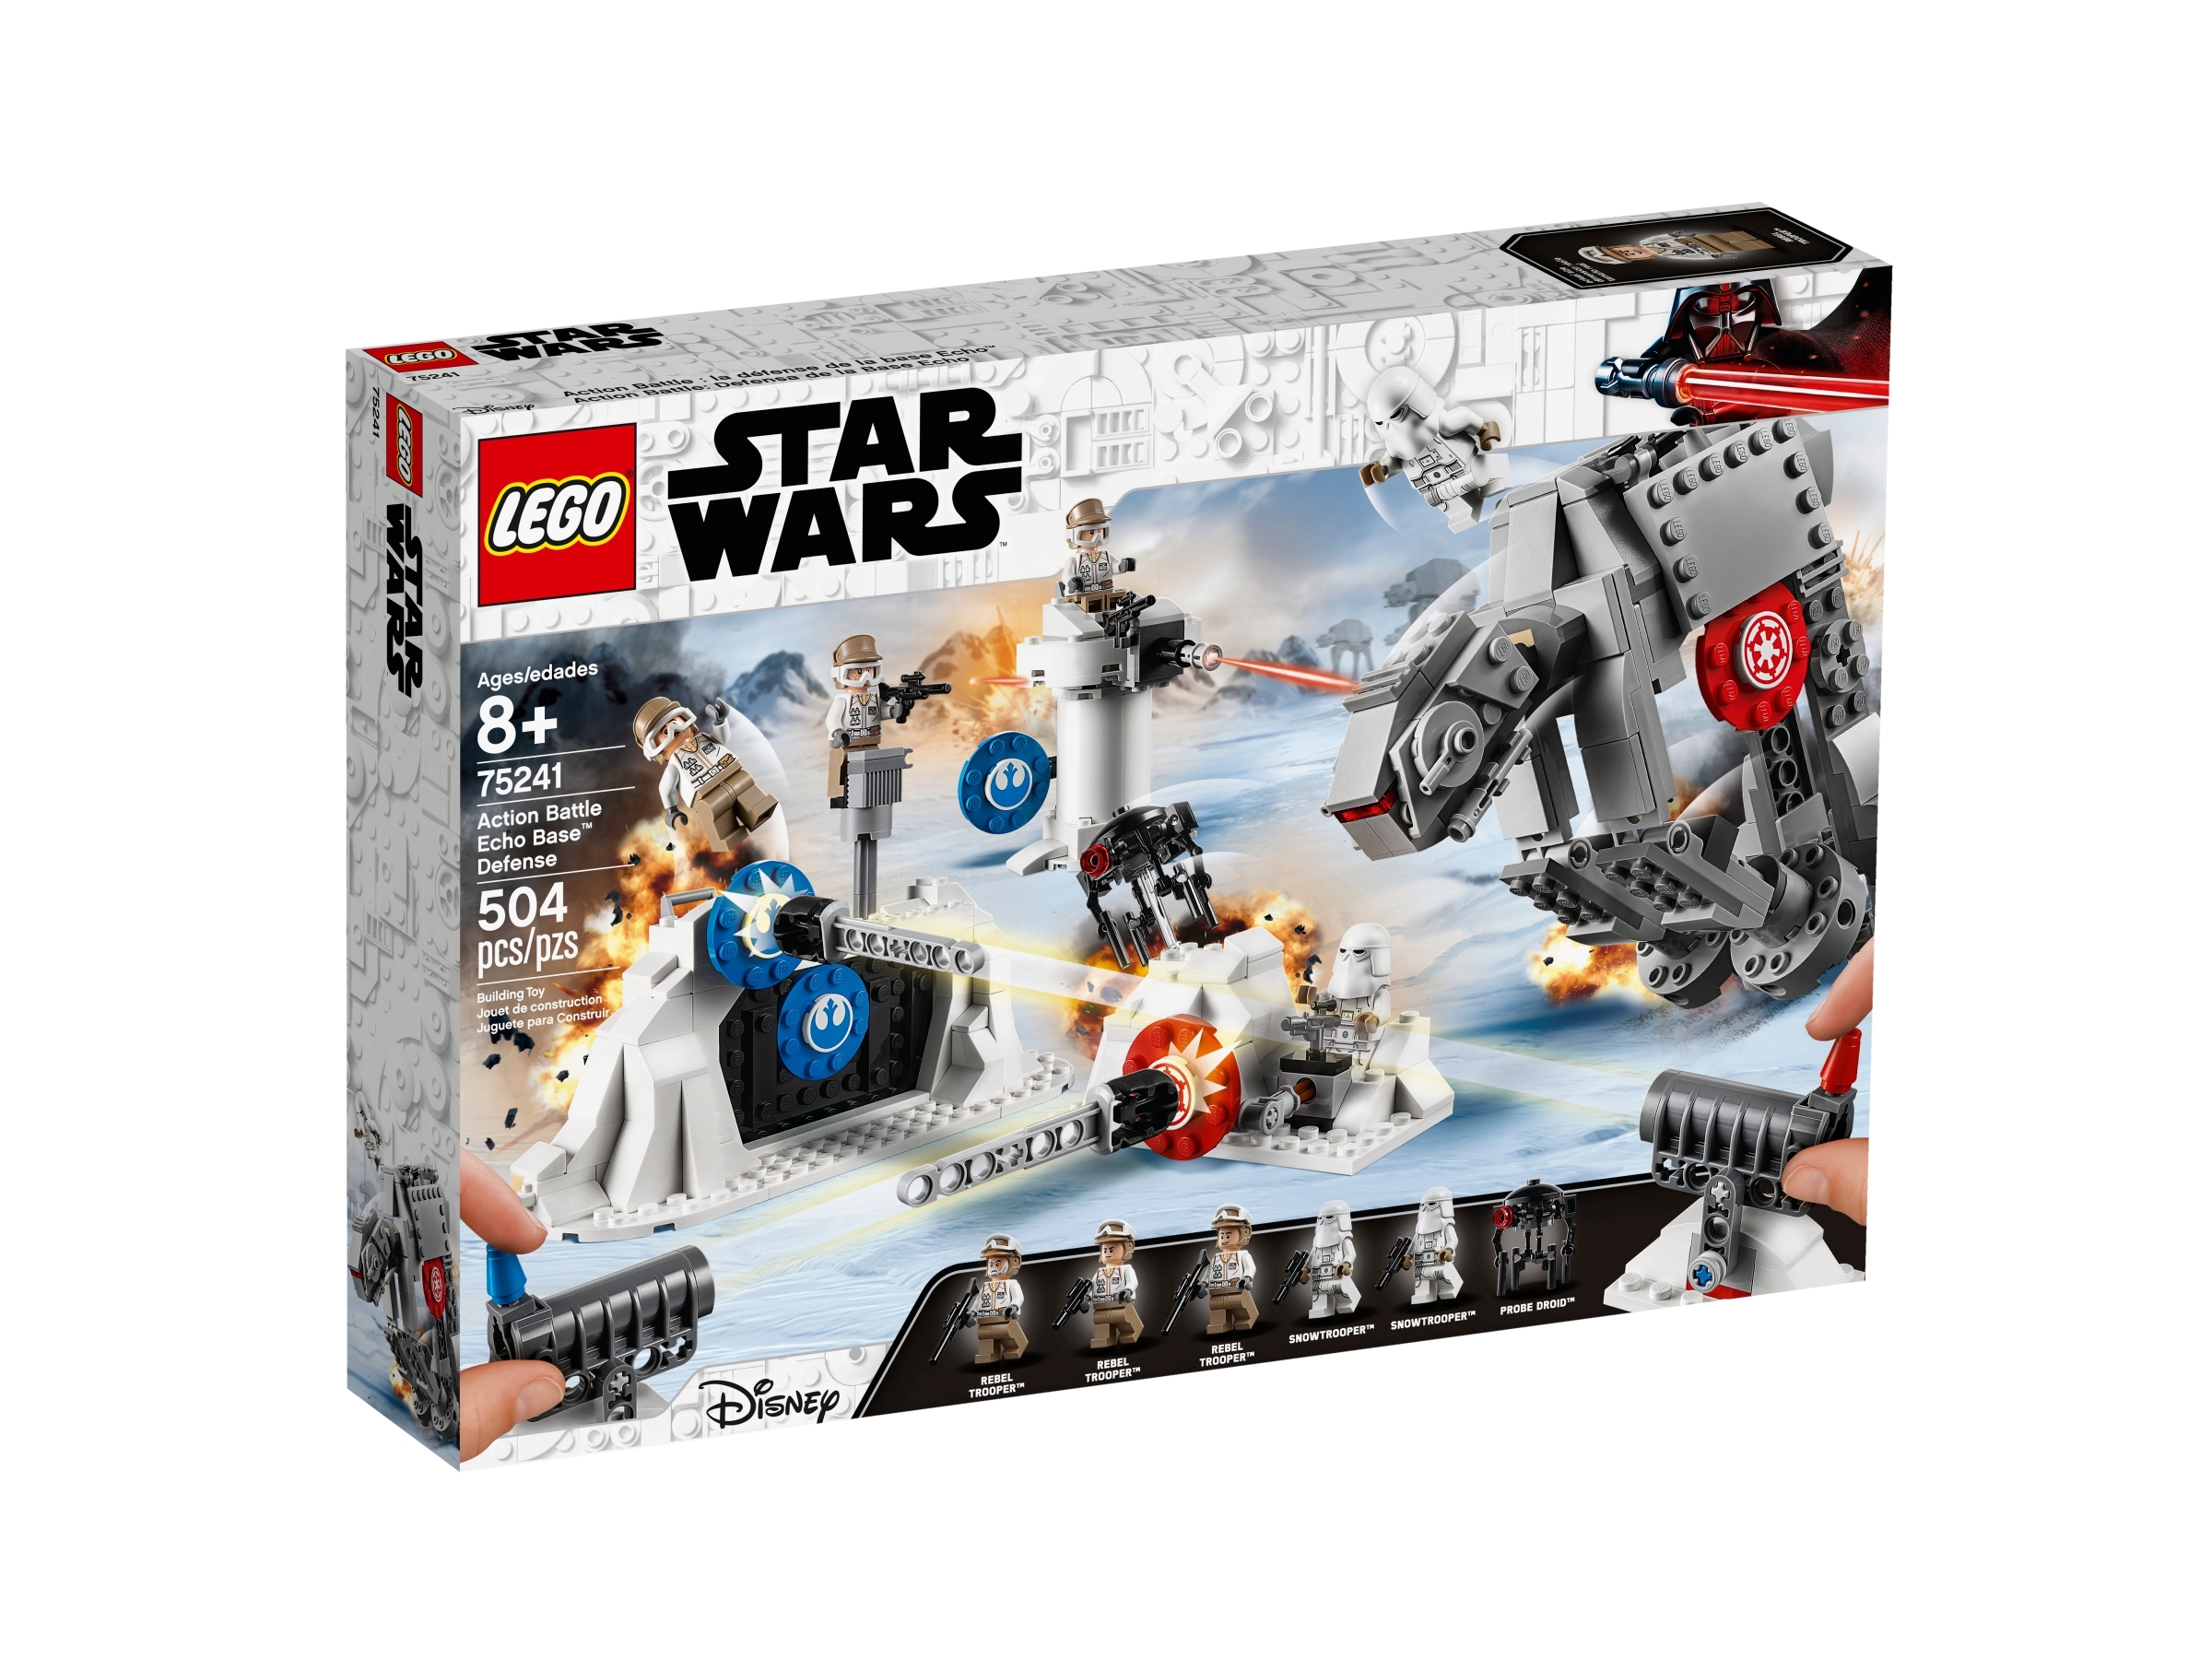 weekend markering reactie Action Battle Echo Base™ Defense 75241 | Star Wars™ | Buy online at the  Official LEGO® Shop US